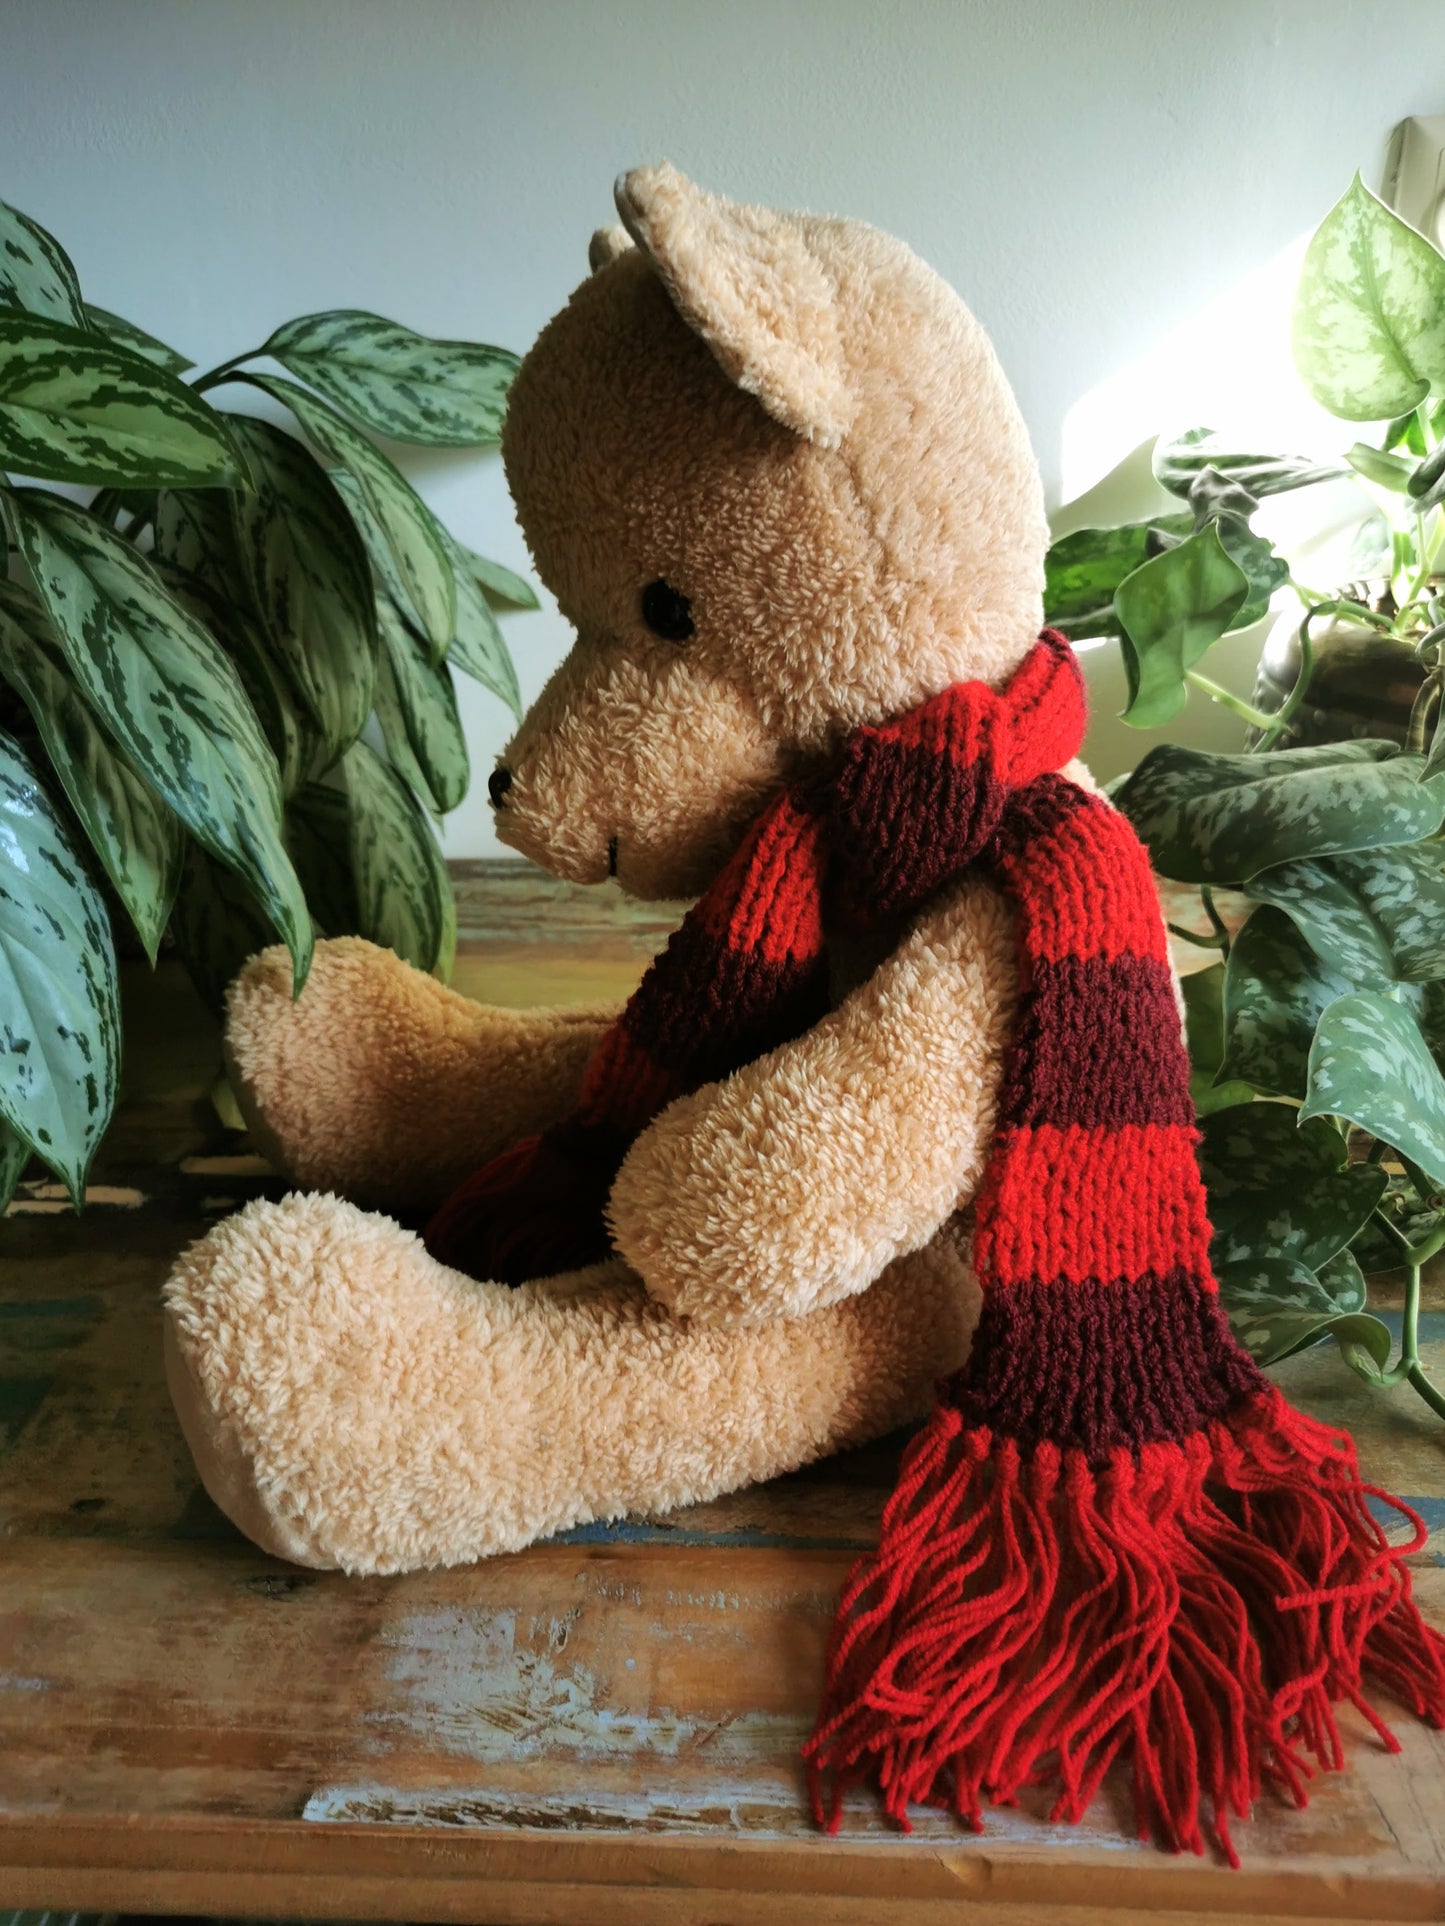 Teddy bear cub with knitted red scarf, plush teddy with weighted beads, toddler teddy bear 55 cm